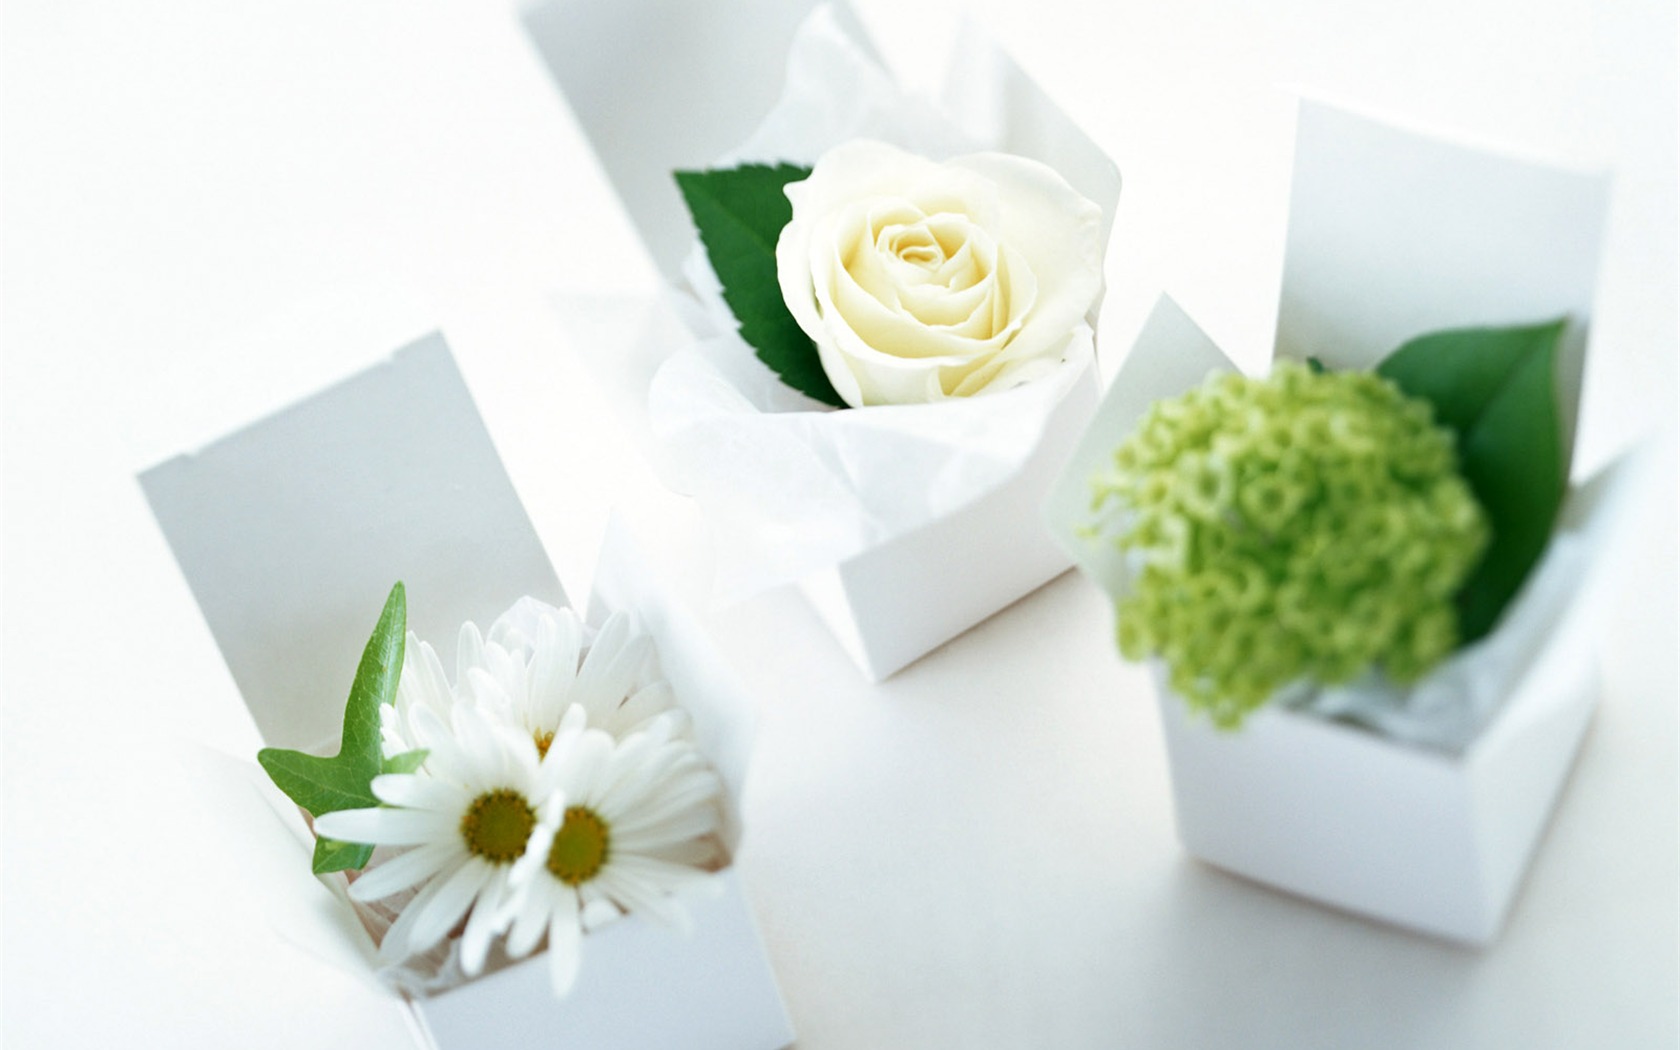 Flowers and gifts wallpaper (1) #16 - 1680x1050